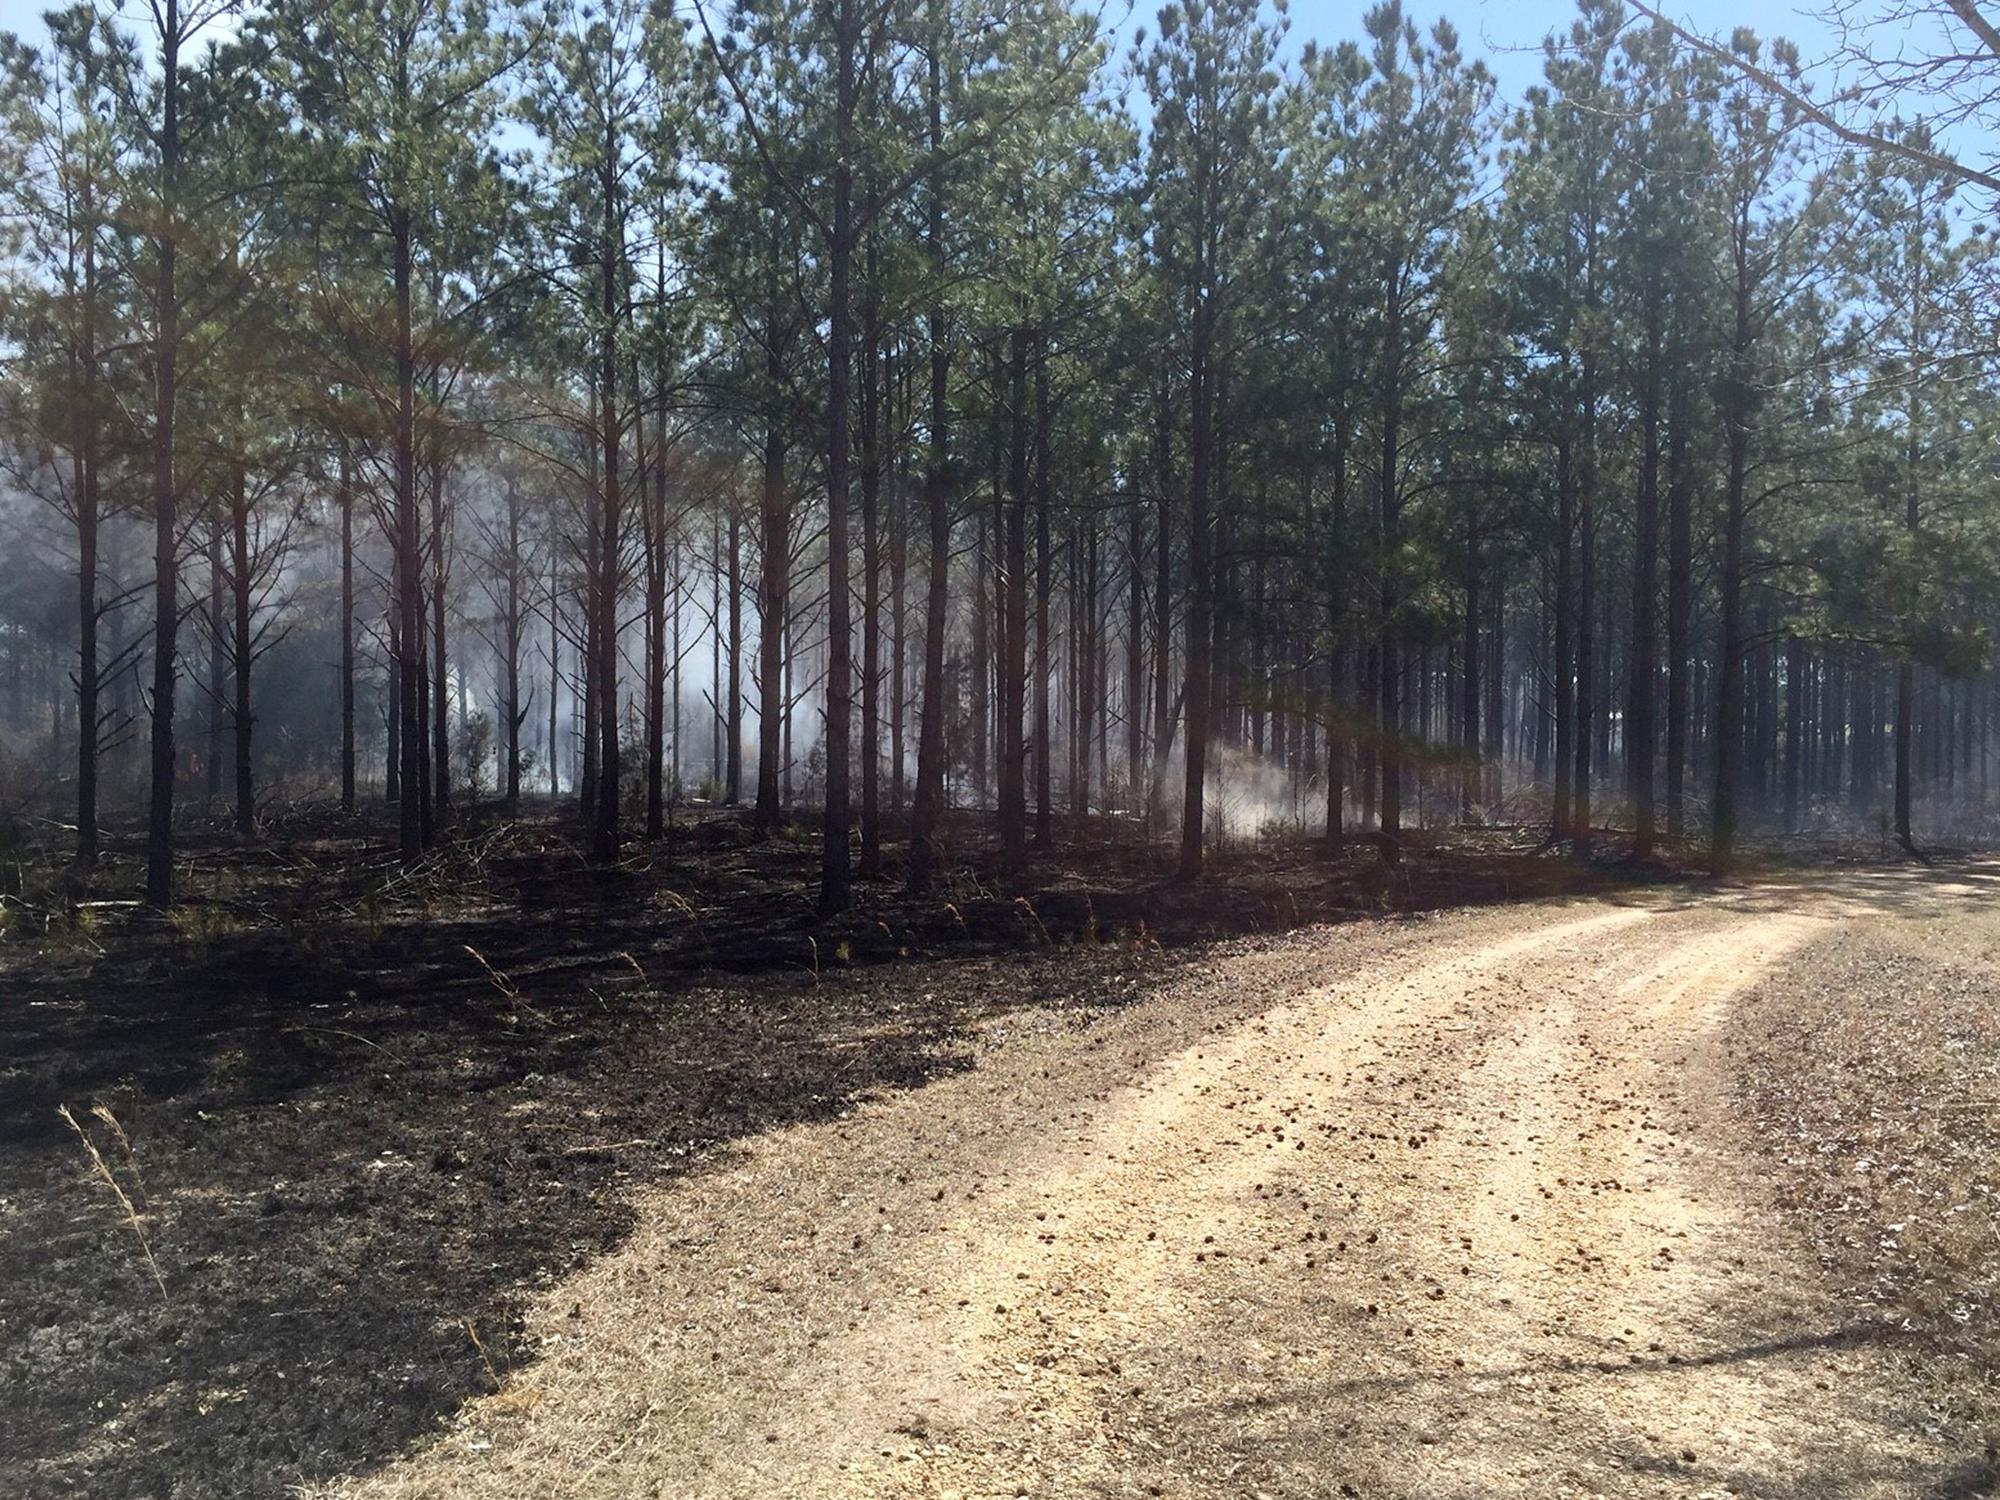 Prescribed burns can reduce the fuel available in forestland, significantly lessening the risk of an unmanaged forest fire. This managed fire was used on Monroe County timberland in February. (Submitted Photo by Matt Walters)